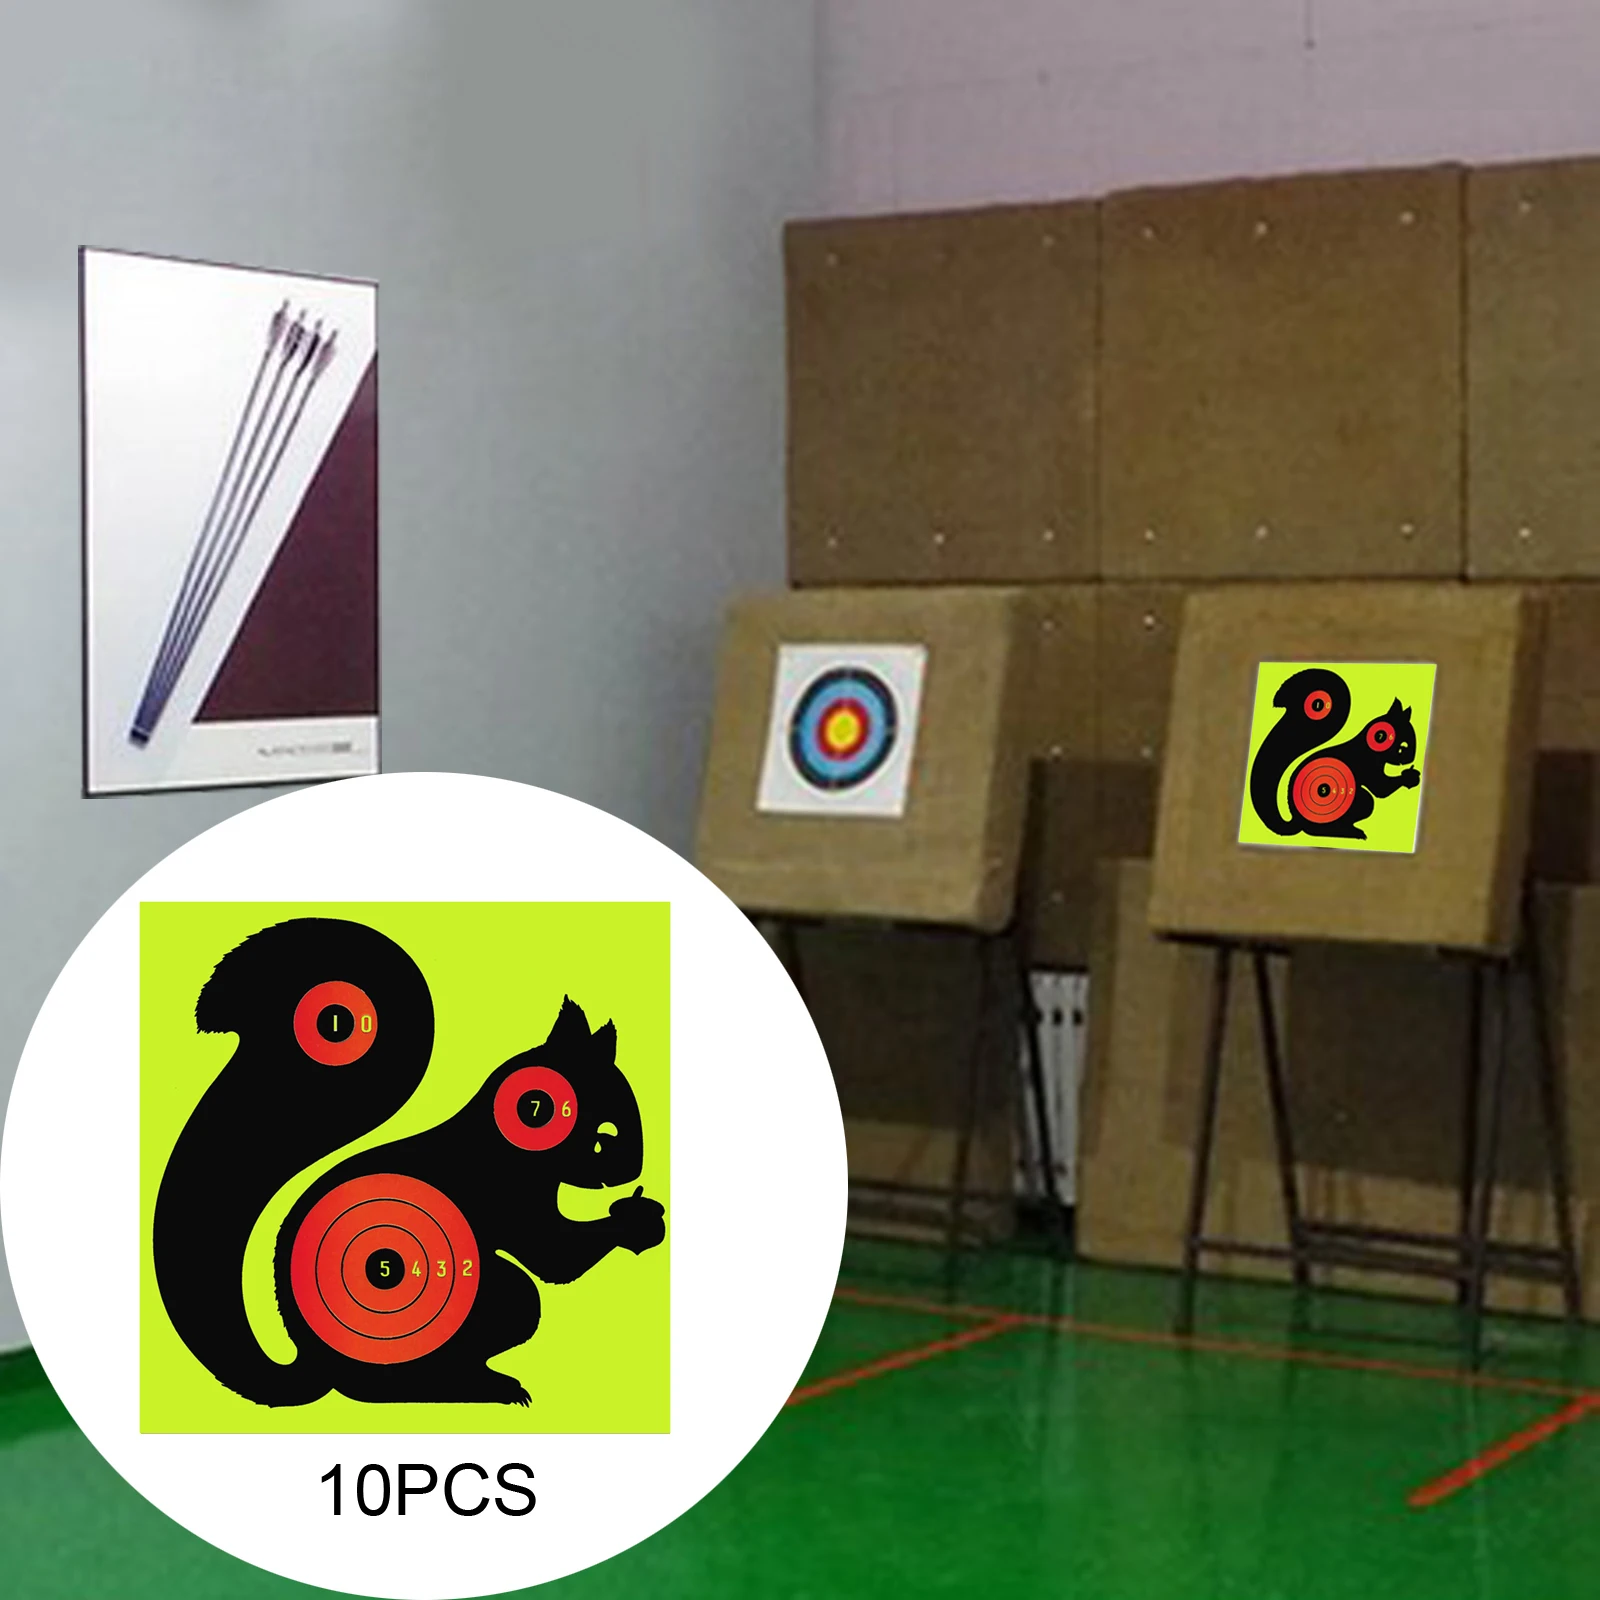 10pcs Paper Target Stickers Adhesive Reactivity Shoot Targets Outdoor Shooting Practice Hunting Training 8*8inch